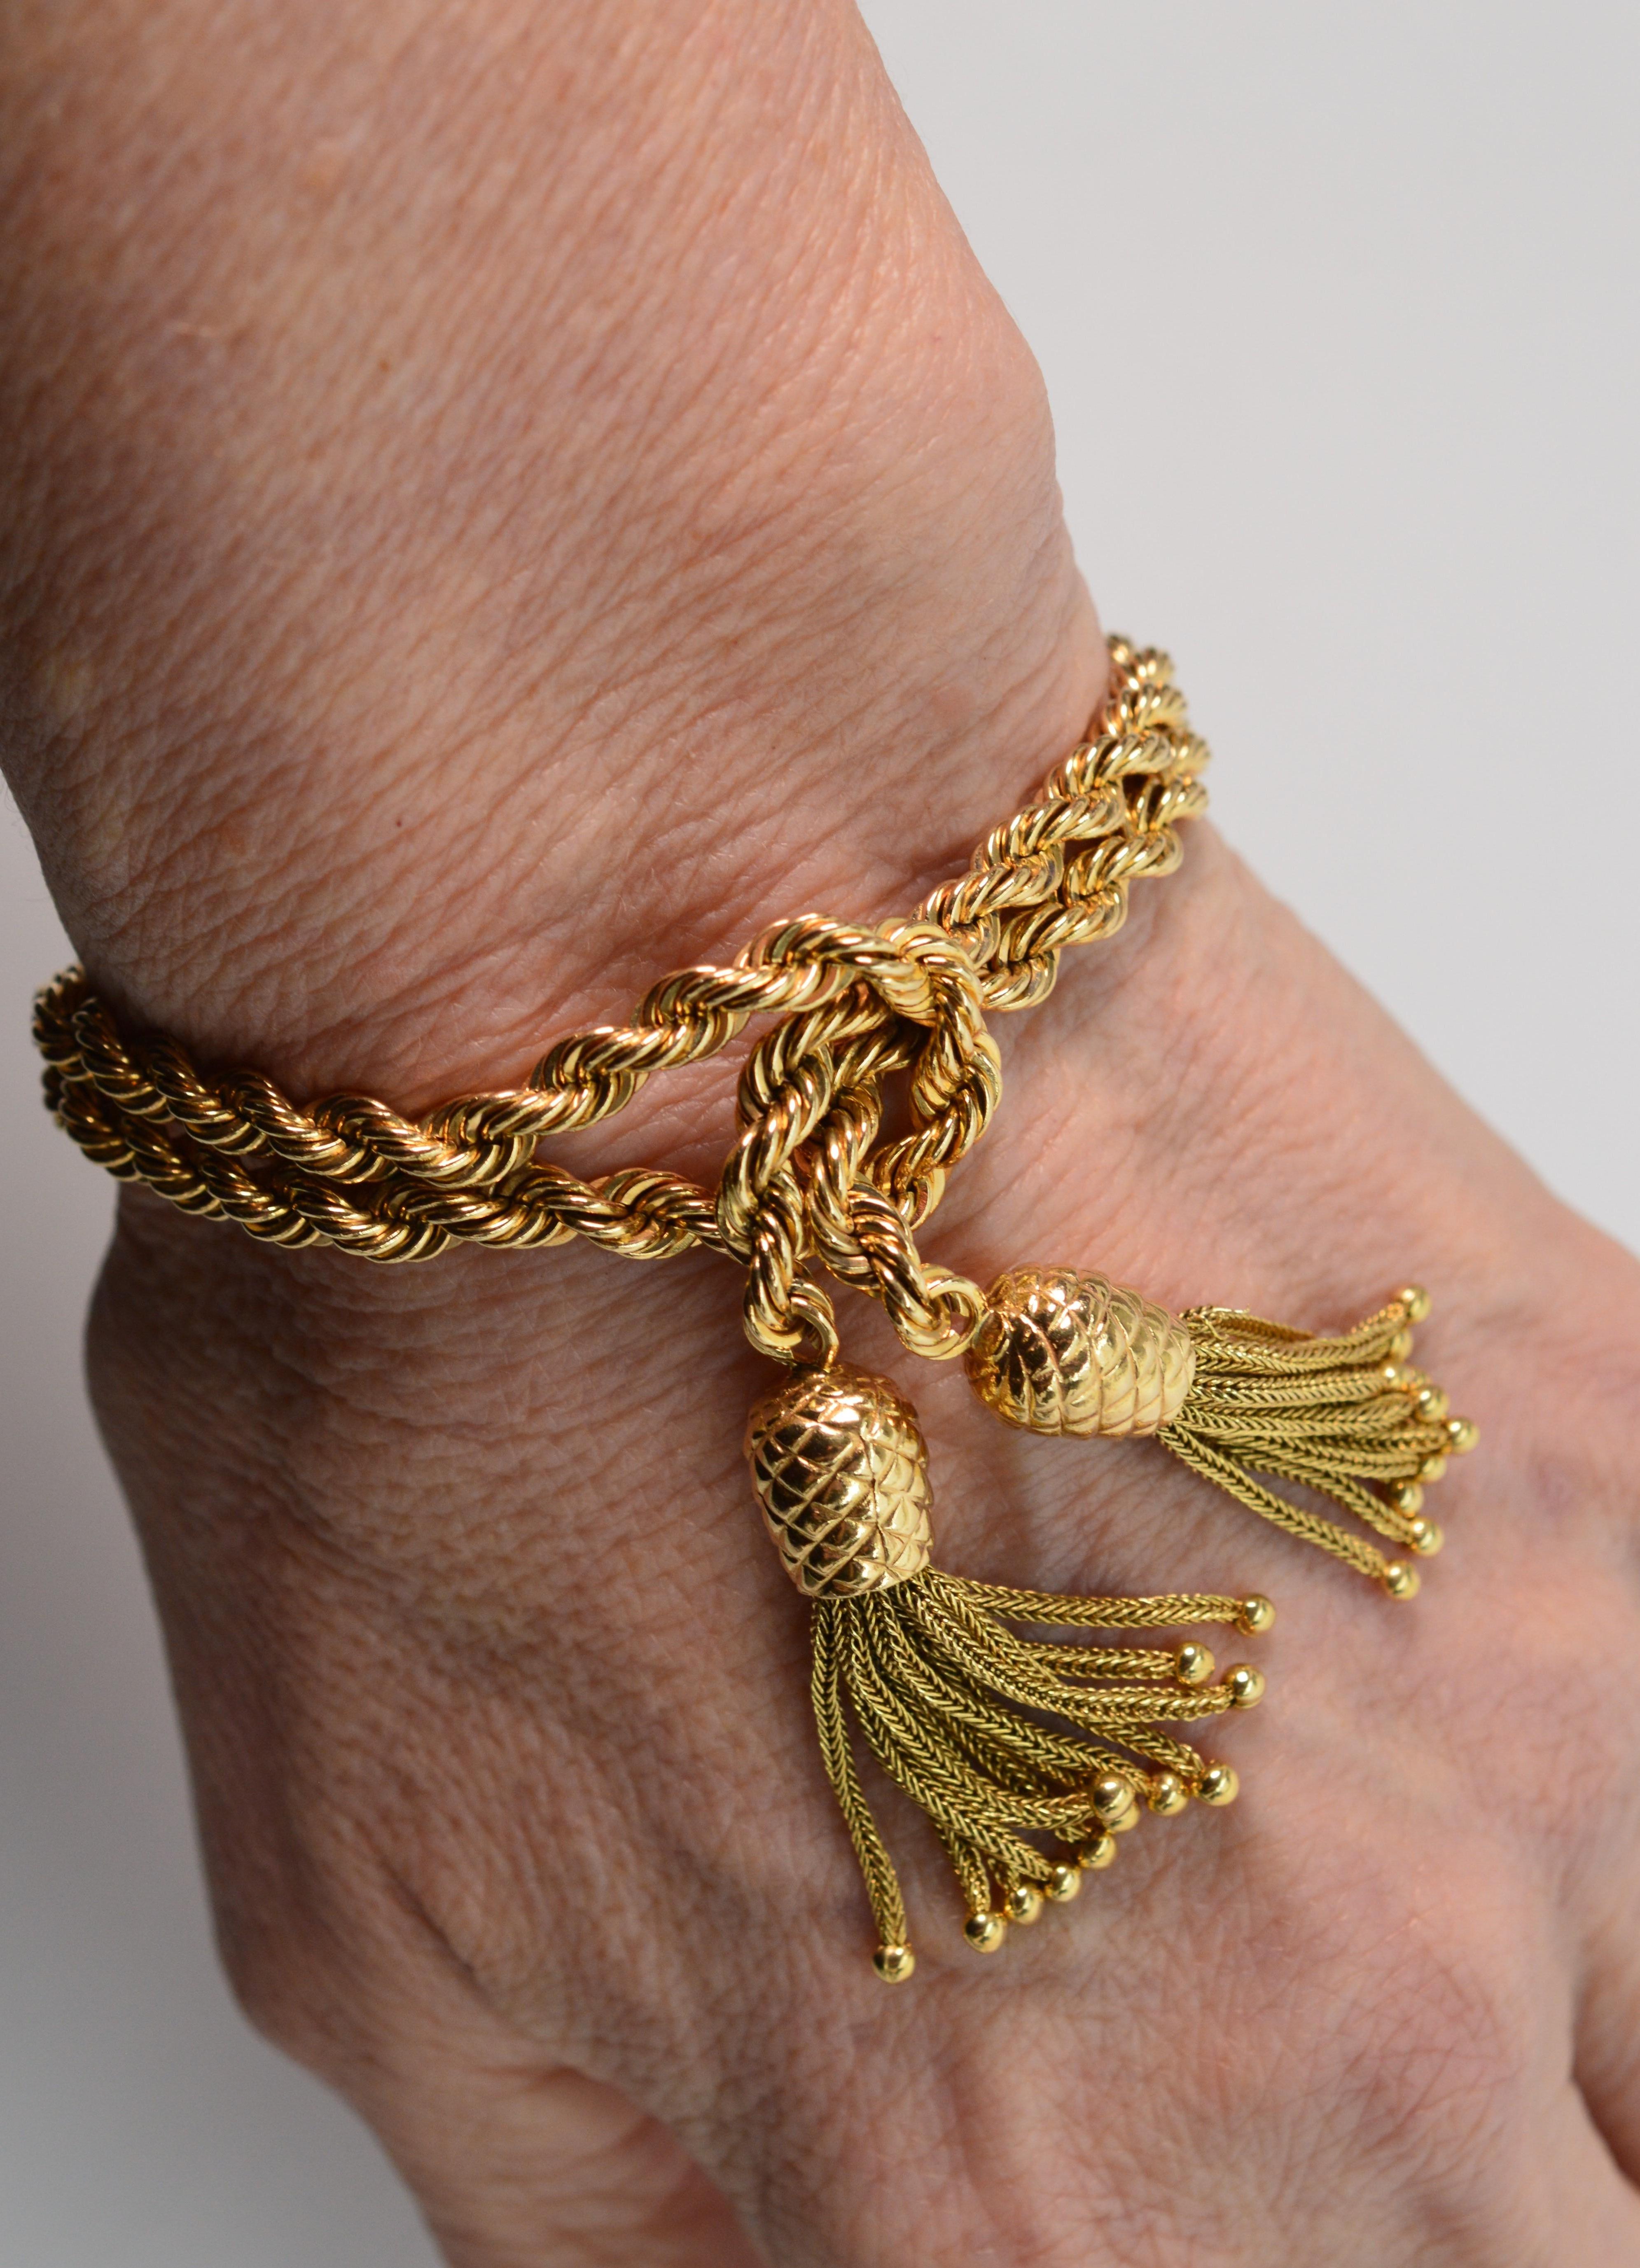 Double Rope Chain 14 Karat Yellow Gold Bracelet with Pineapple Charm Tassels 6